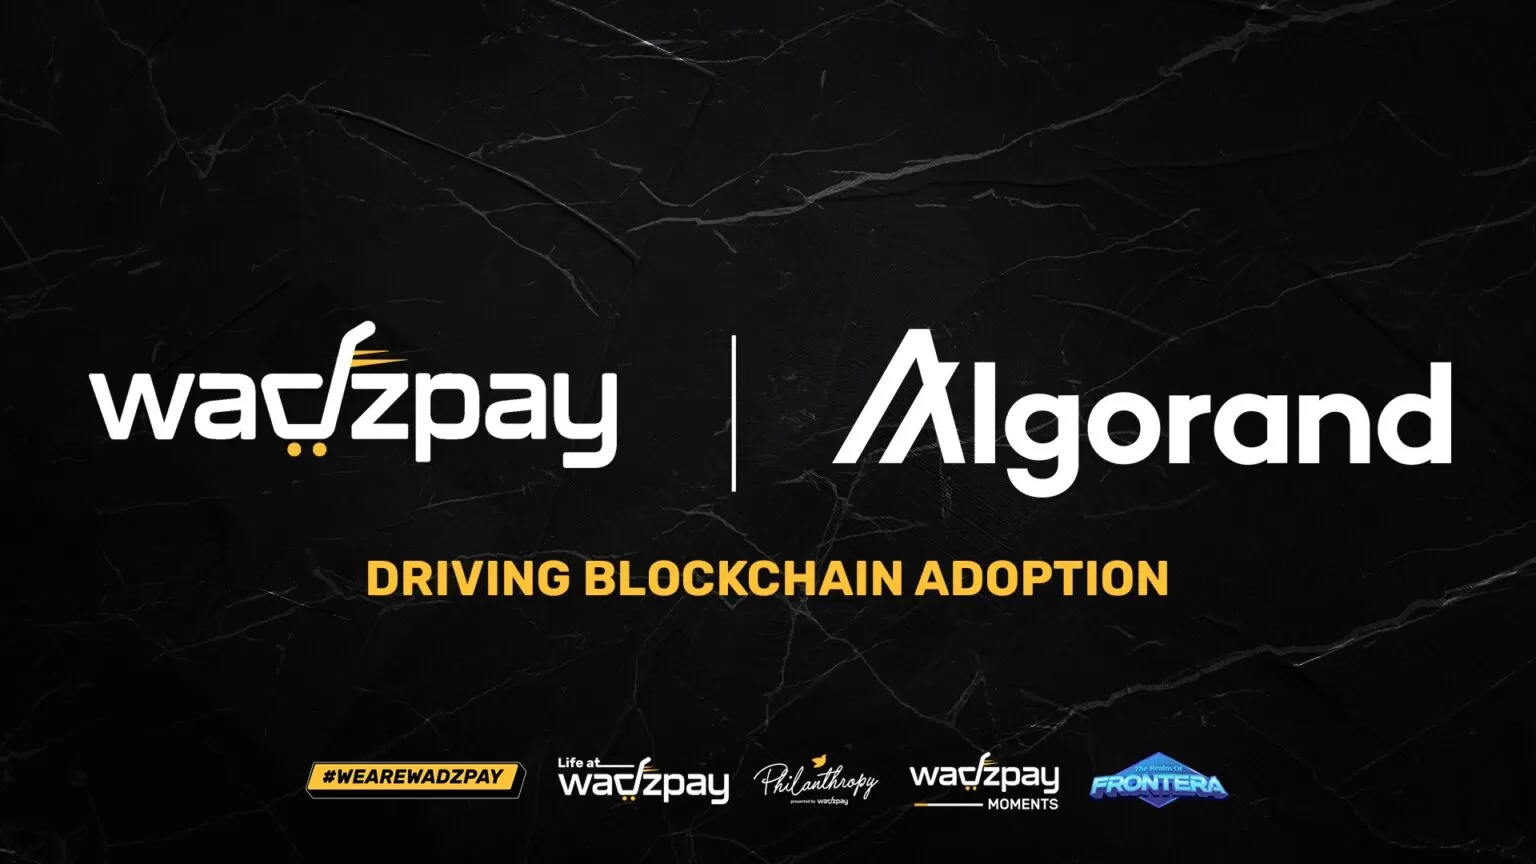 WadzPay x Algorand Announcement Campaign, Behind the Clues